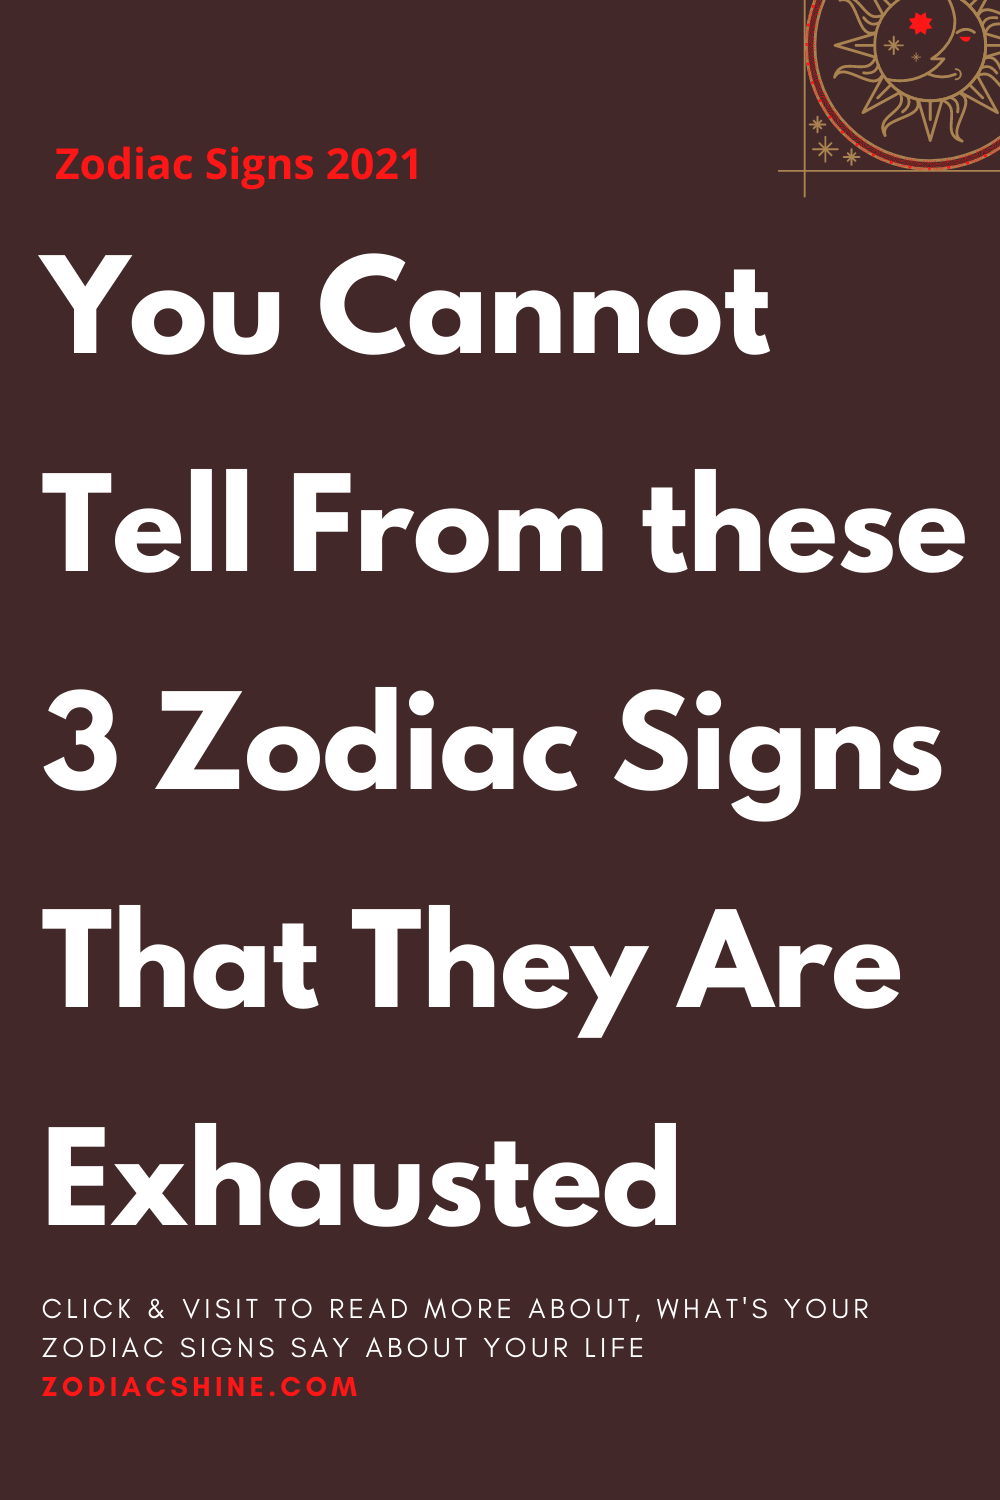 You cannot tell from these 3 zodiac signs that they are exhausted